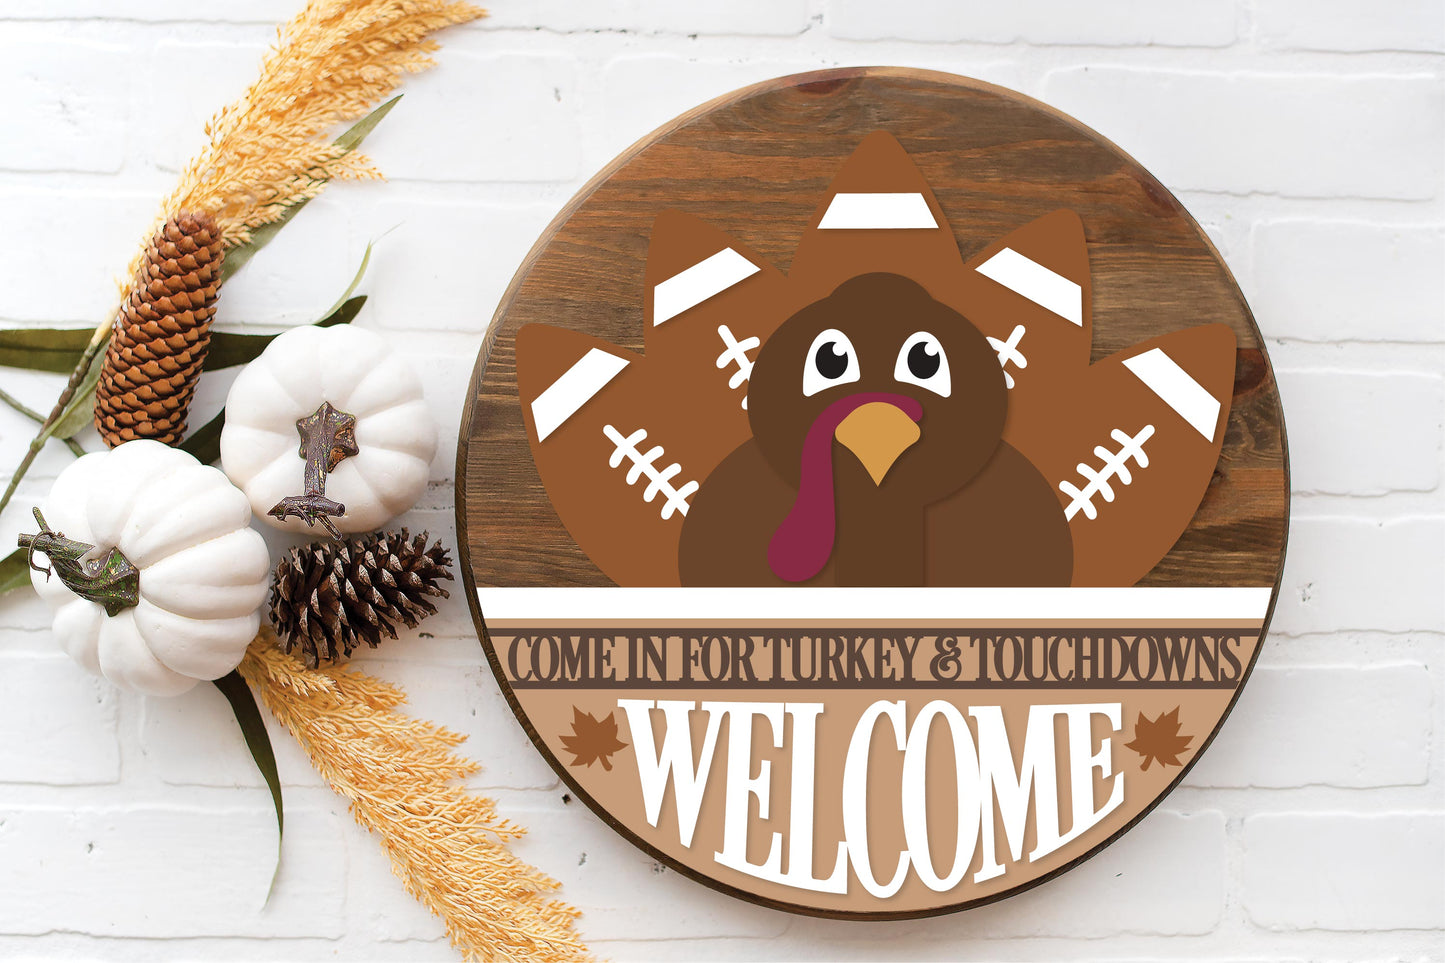 Turkey and touchdowns sign